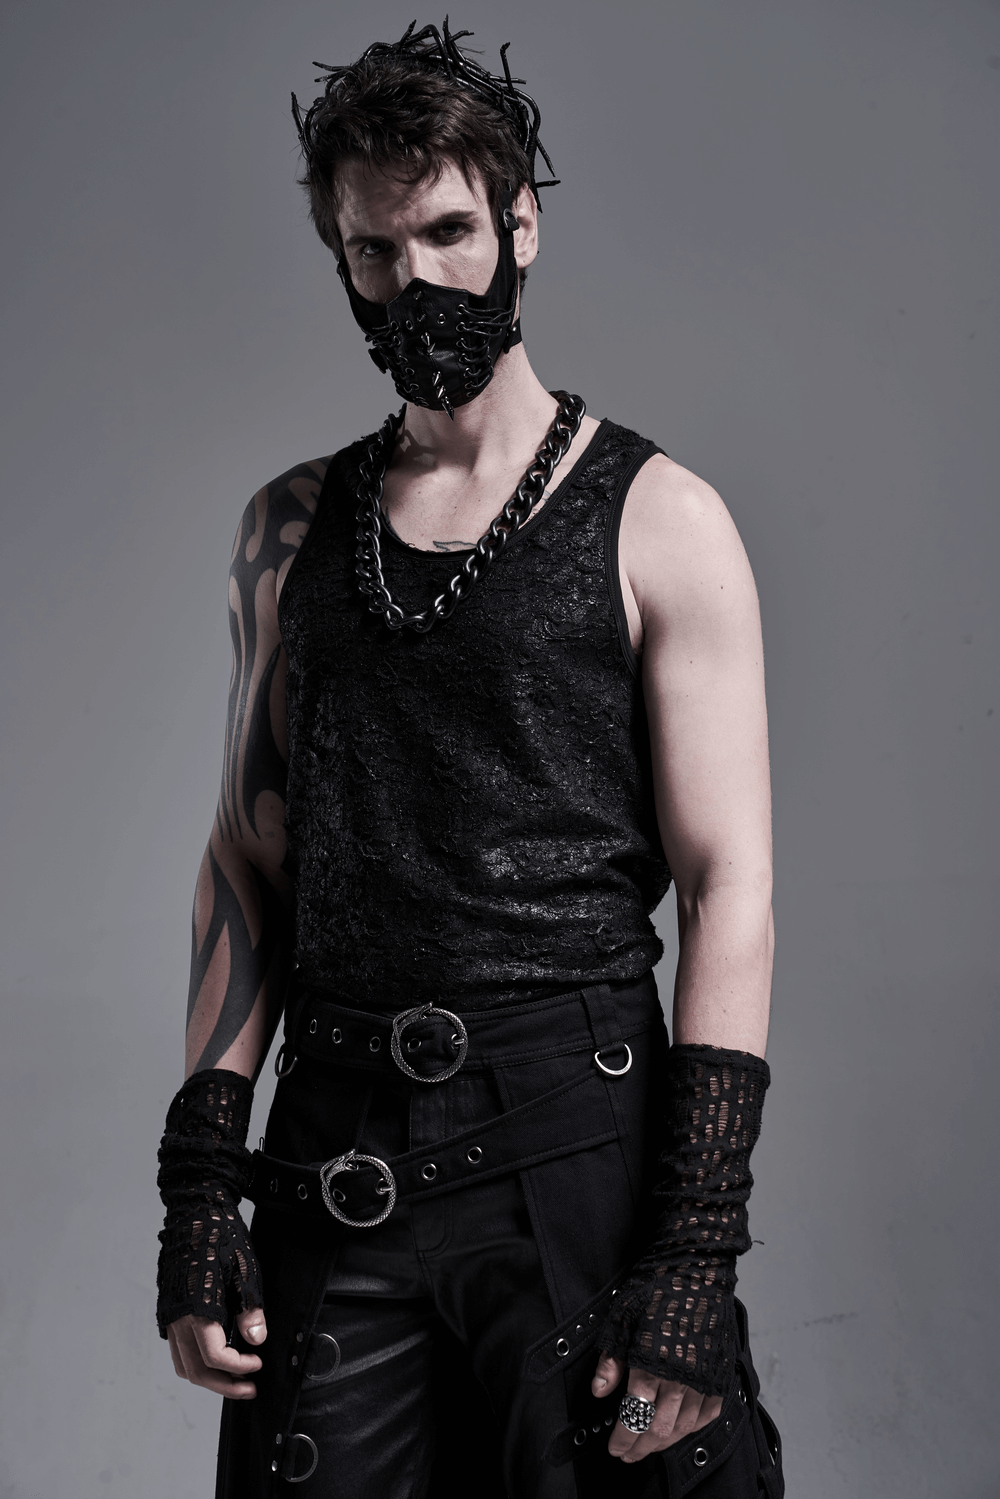 Black Punk PU Leather Mask with Rivets And Laces